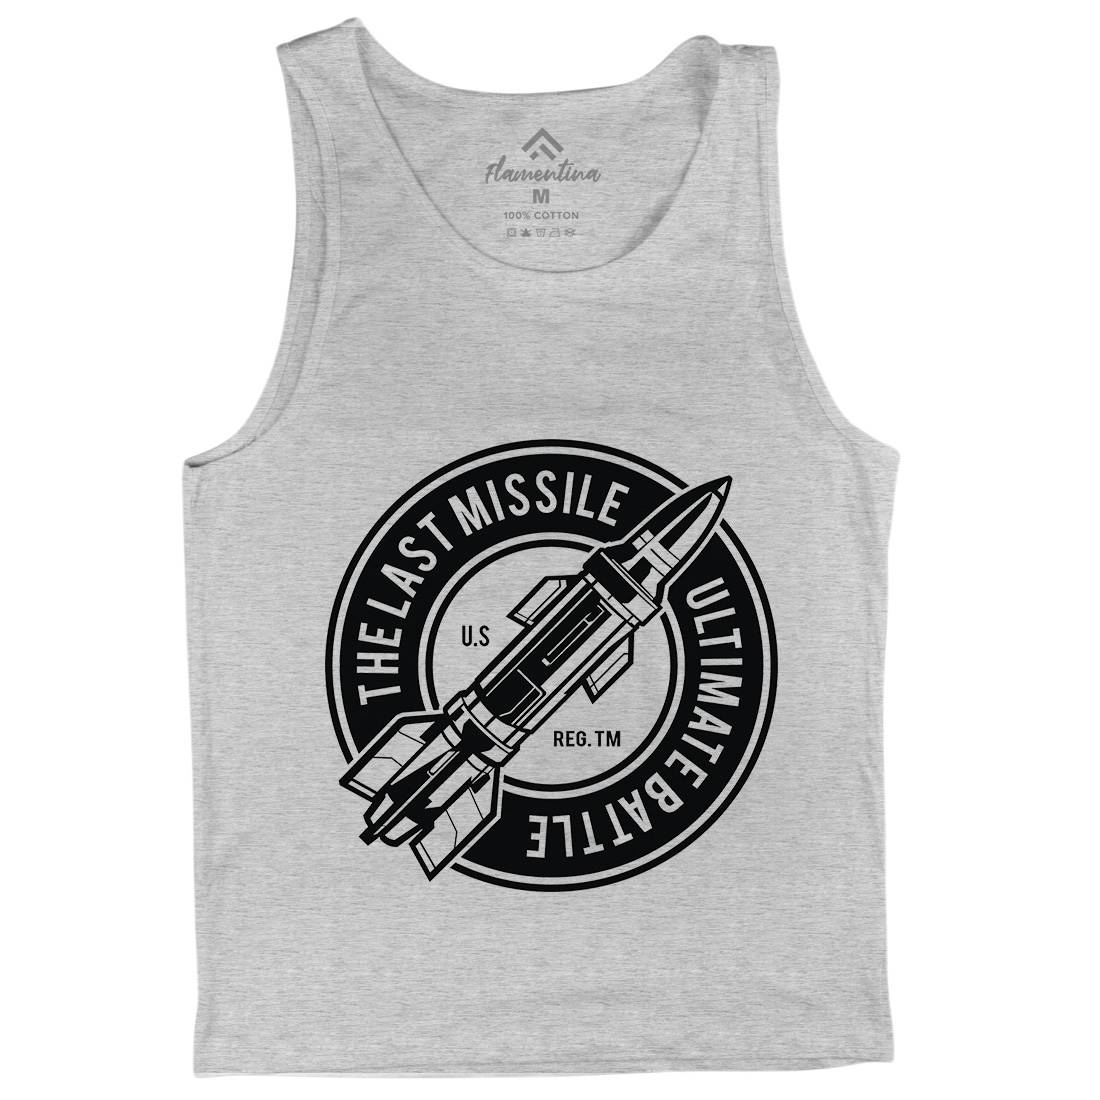 Last Missile Mens Tank Top Vest Army A175